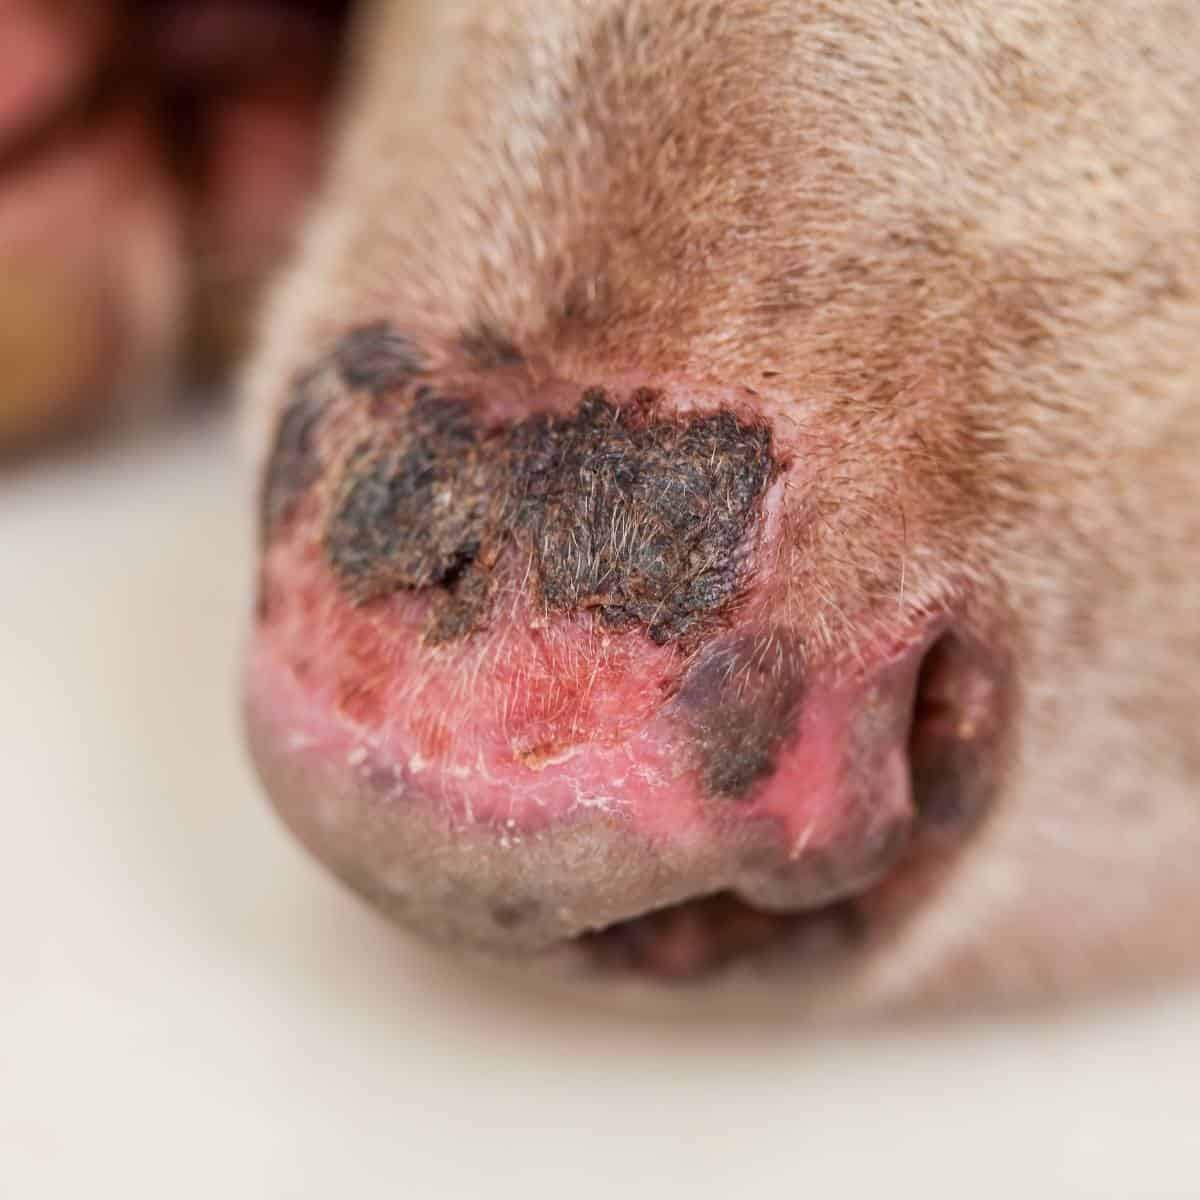 close up of a dog's nose that is dry and cracked from sunburn